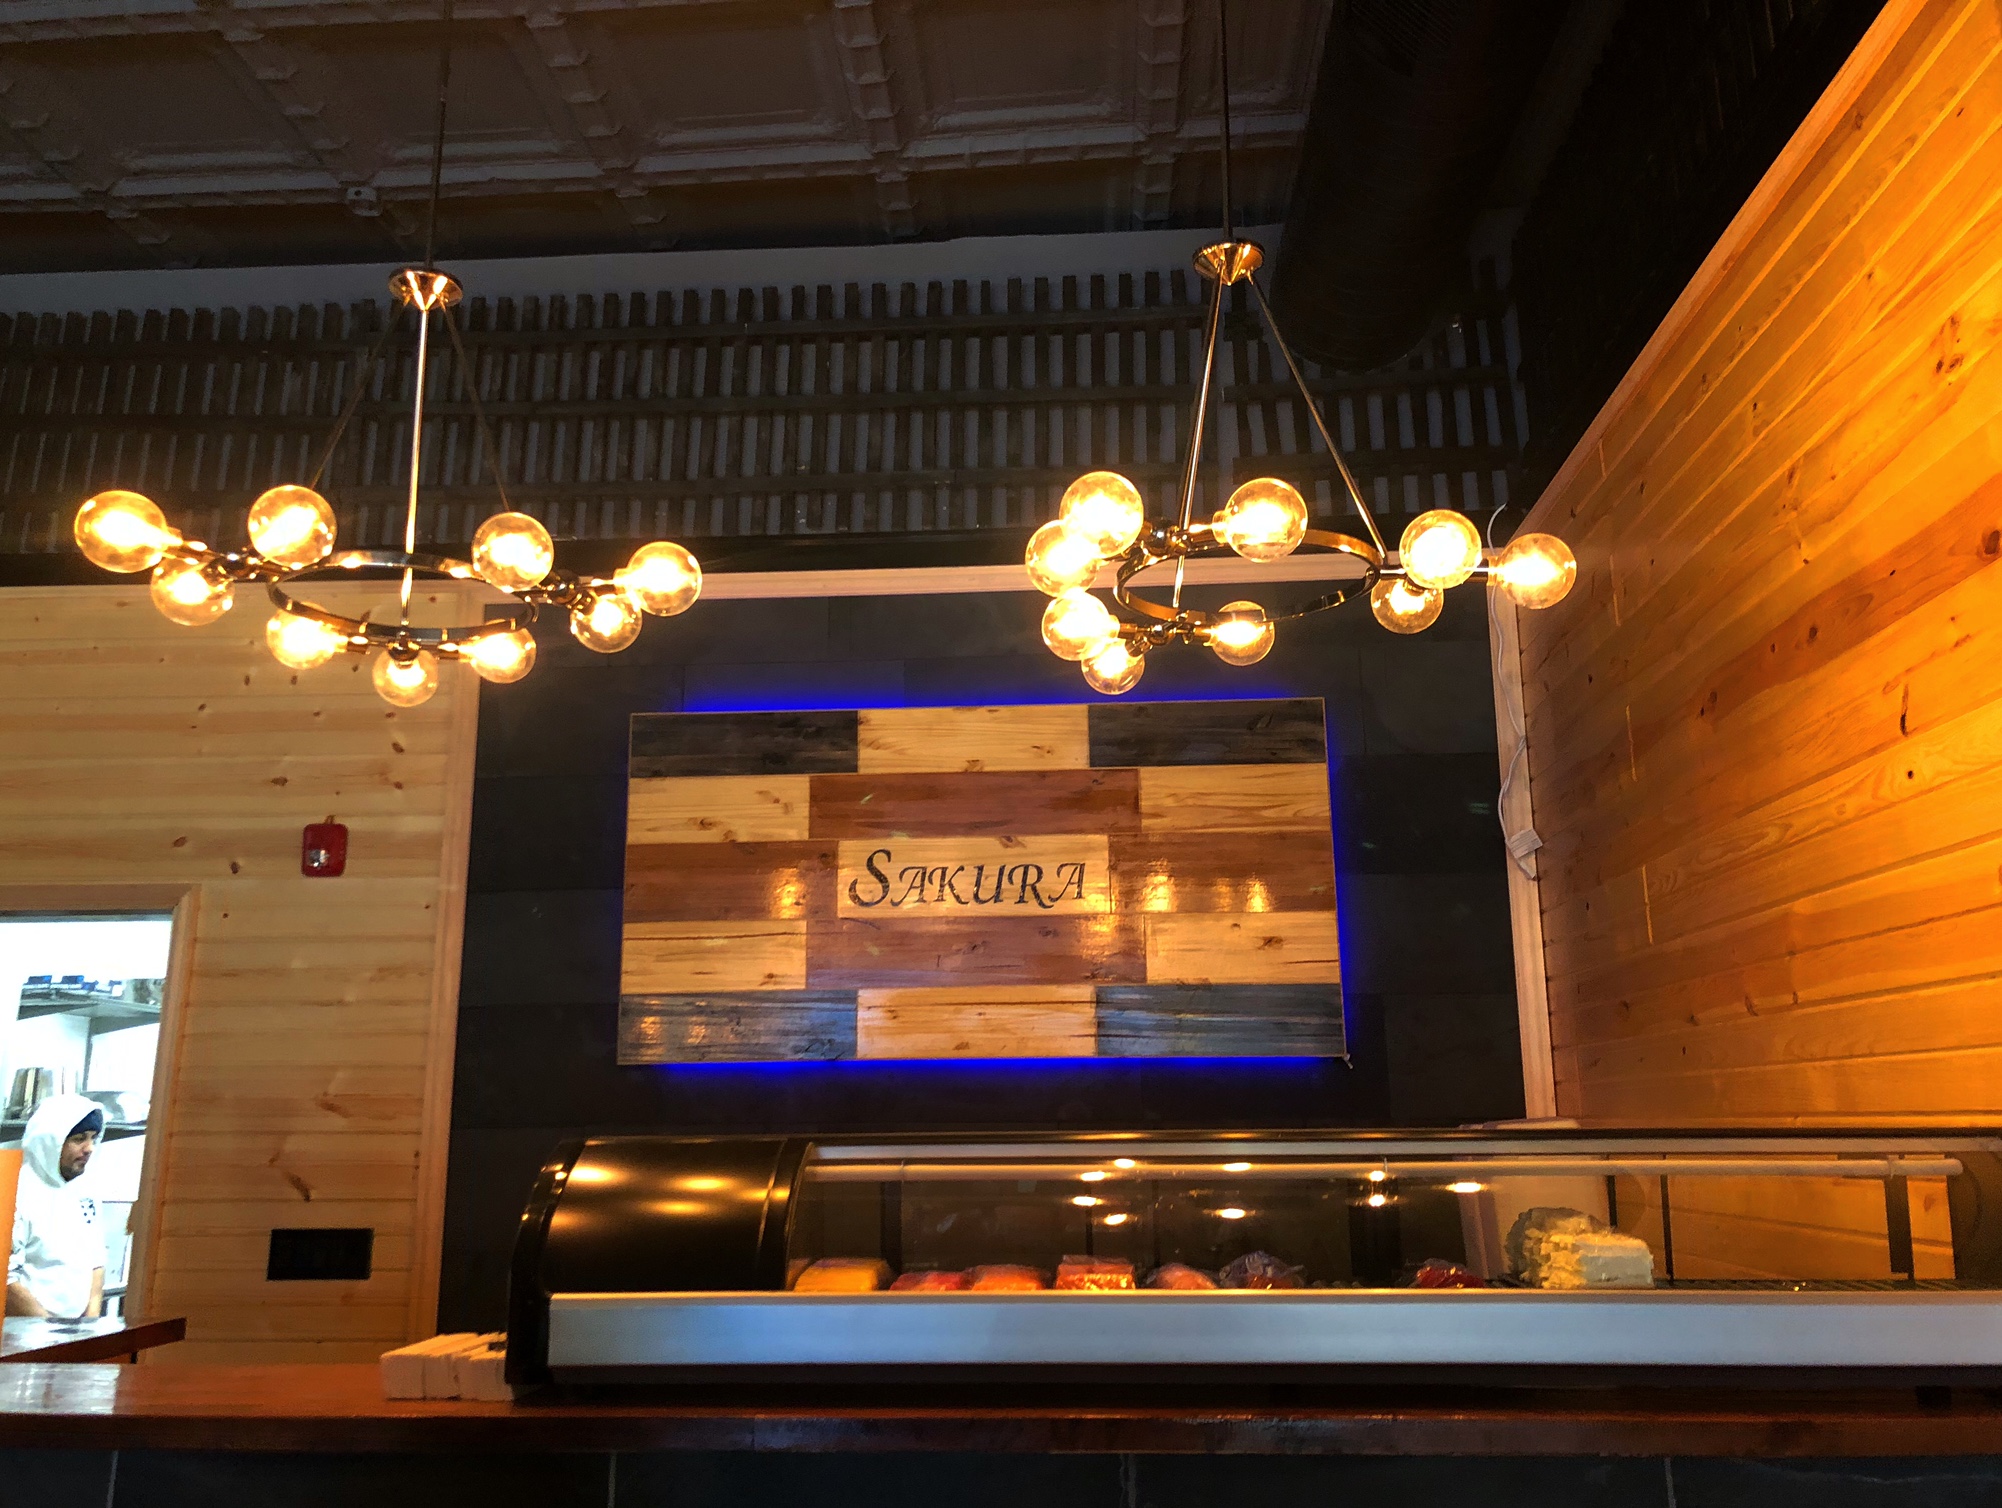 Inside Sakura, there is a sushi bar with the name of the restaurant on wood on top of a black background. There are two big beautiful golden light fixtures. Photo by Alyssa Buckley.